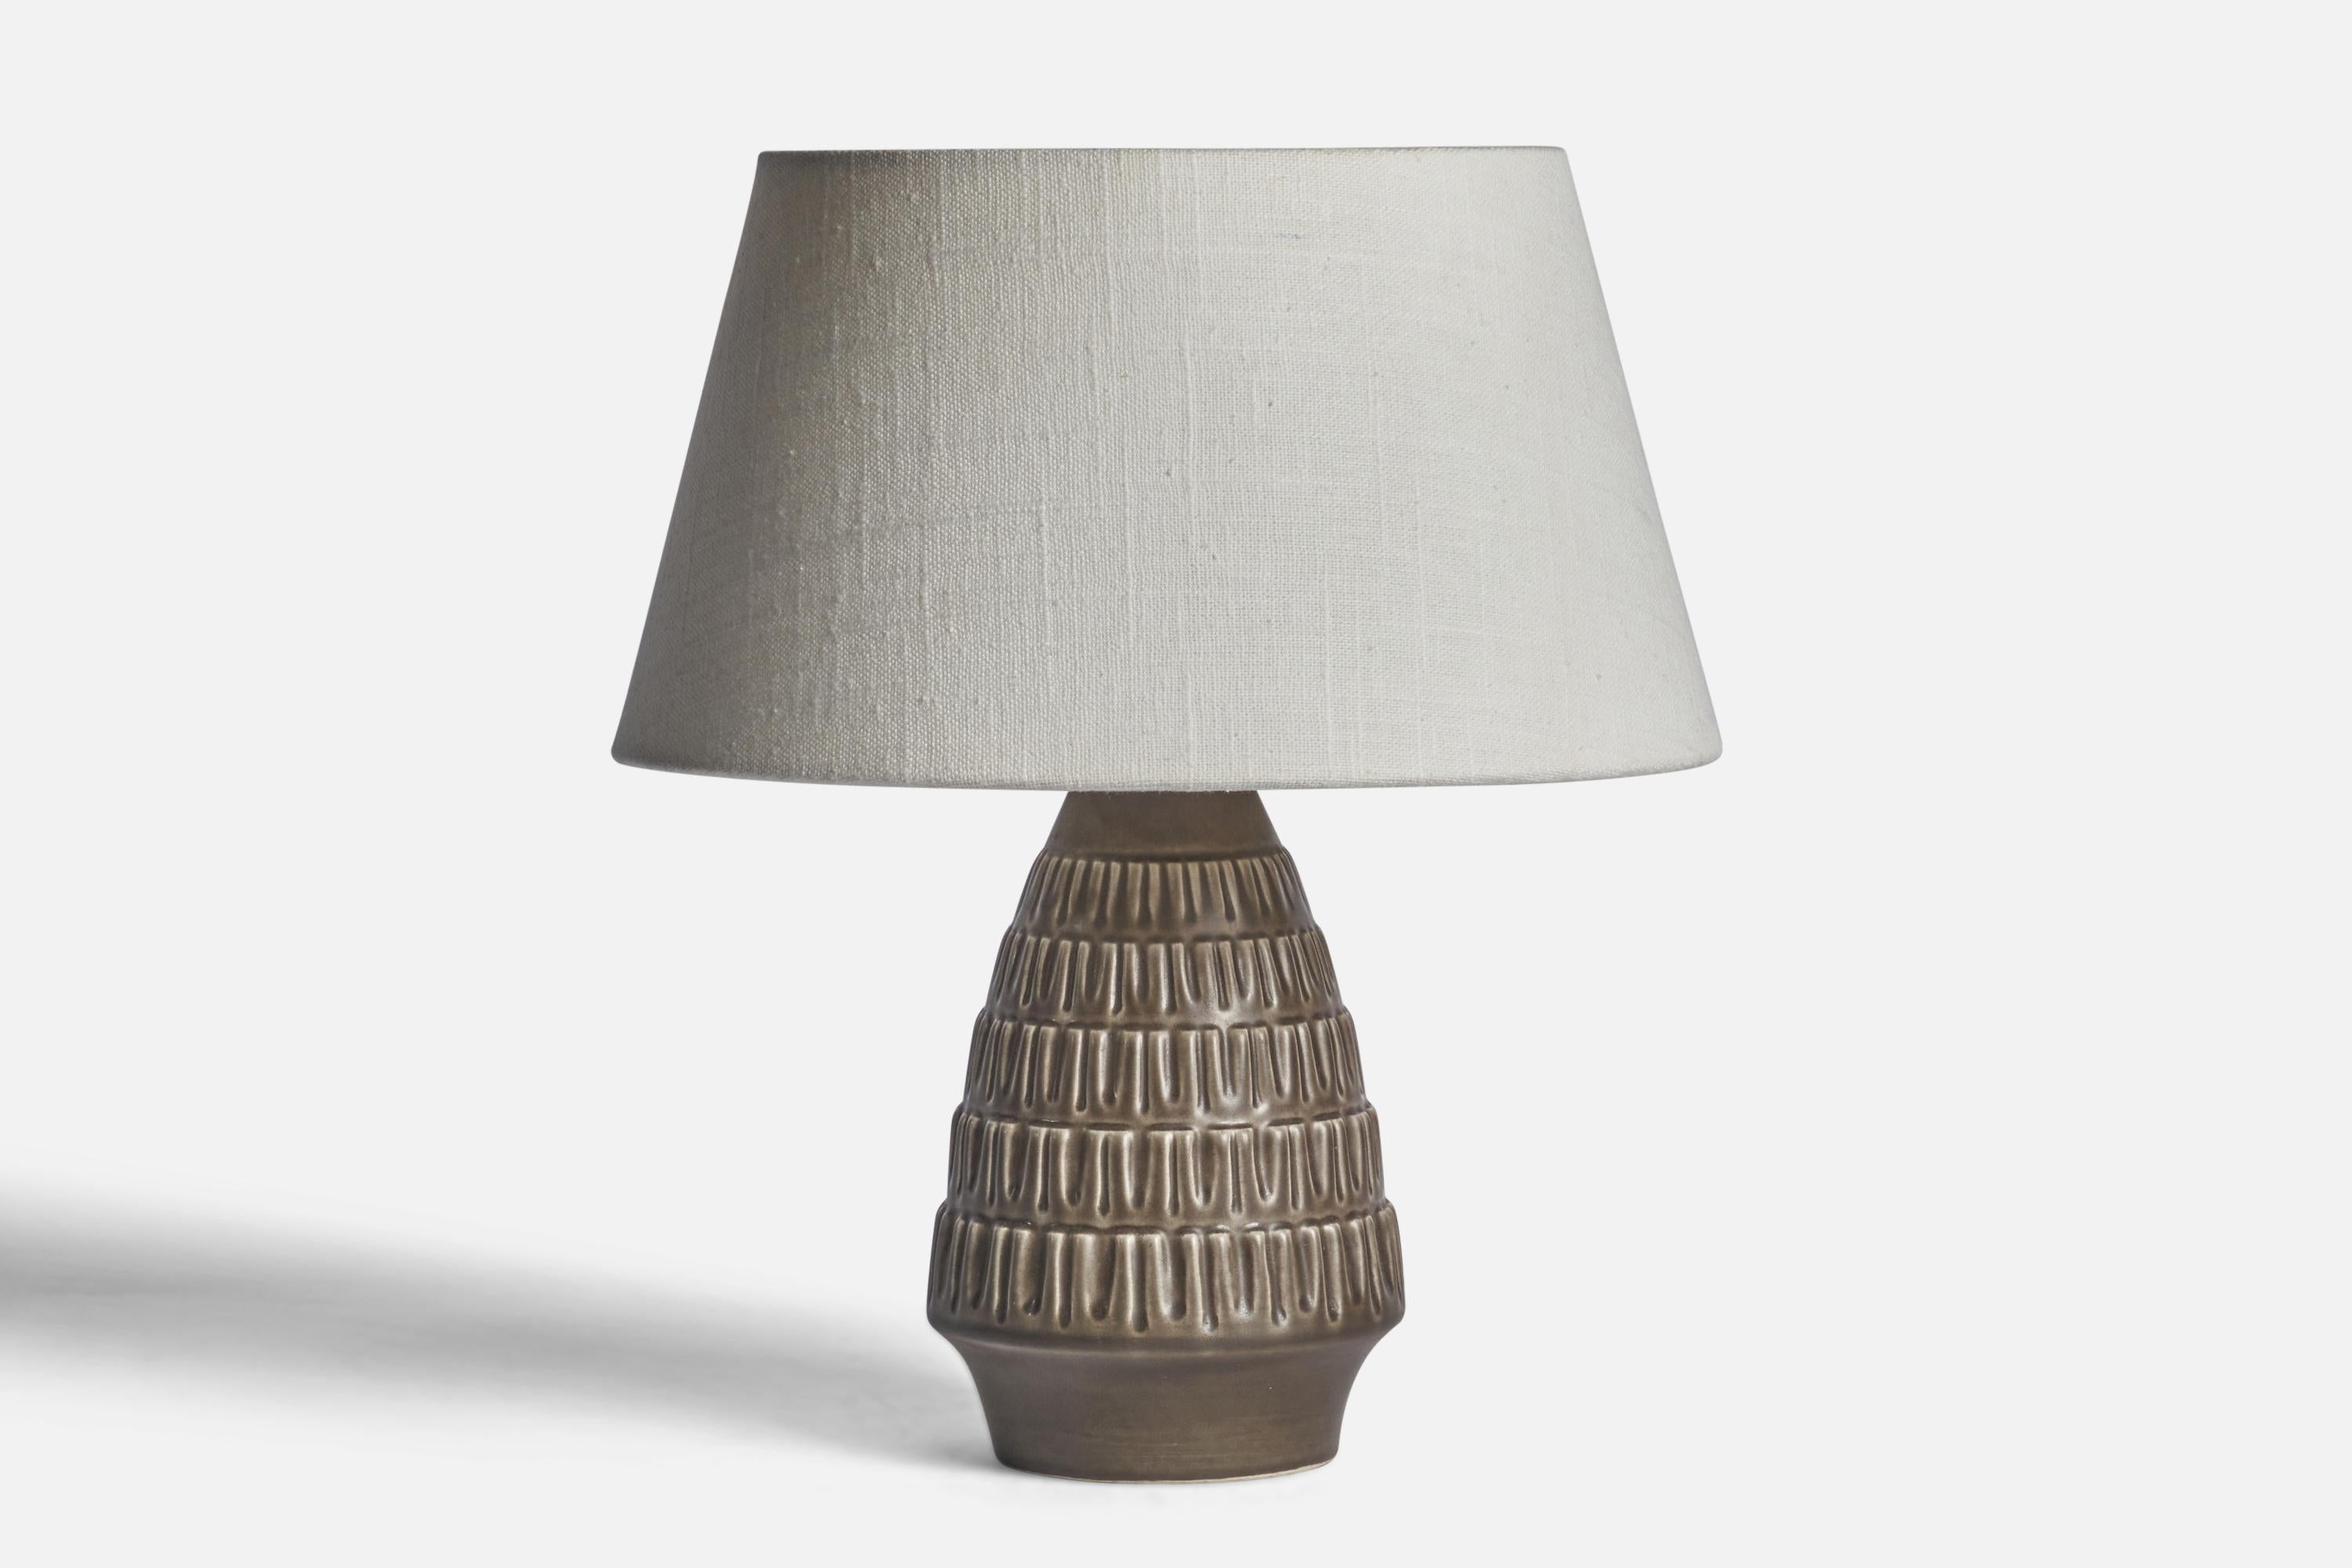 A grey-glazed stoneware table lamp designed and produced by 
Søholm, Denmark, 1960s.

Dimensions of Lamp (inches): 9.25” H x 4.45” Diameter
Dimensions of Shade (inches): 7” Top Diameter x 10” Bottom Diameter x 5.5” H 
Dimensions of Lamp with Shade